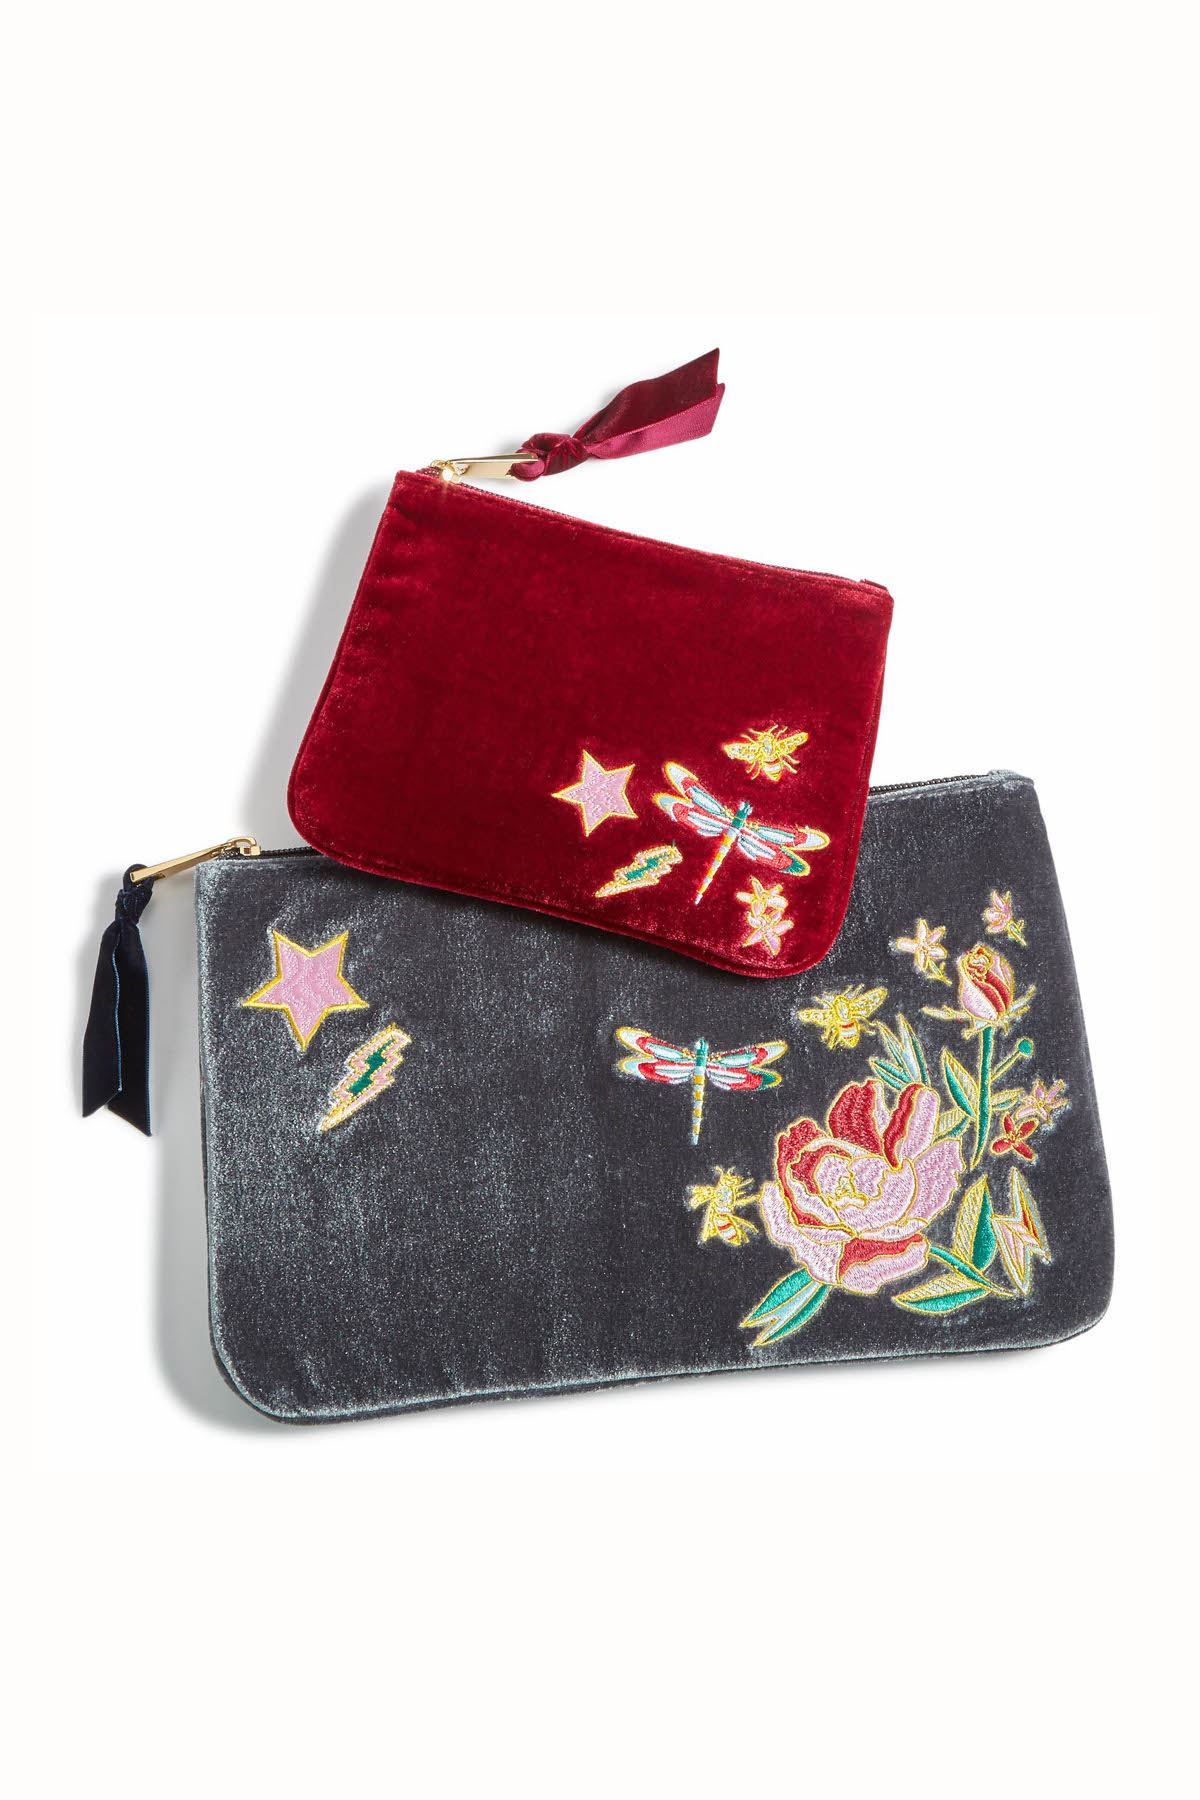 Celebrate Shop Charcoal/Maroon Embroidered Velvet Cosmetic Pouch 2-Pack